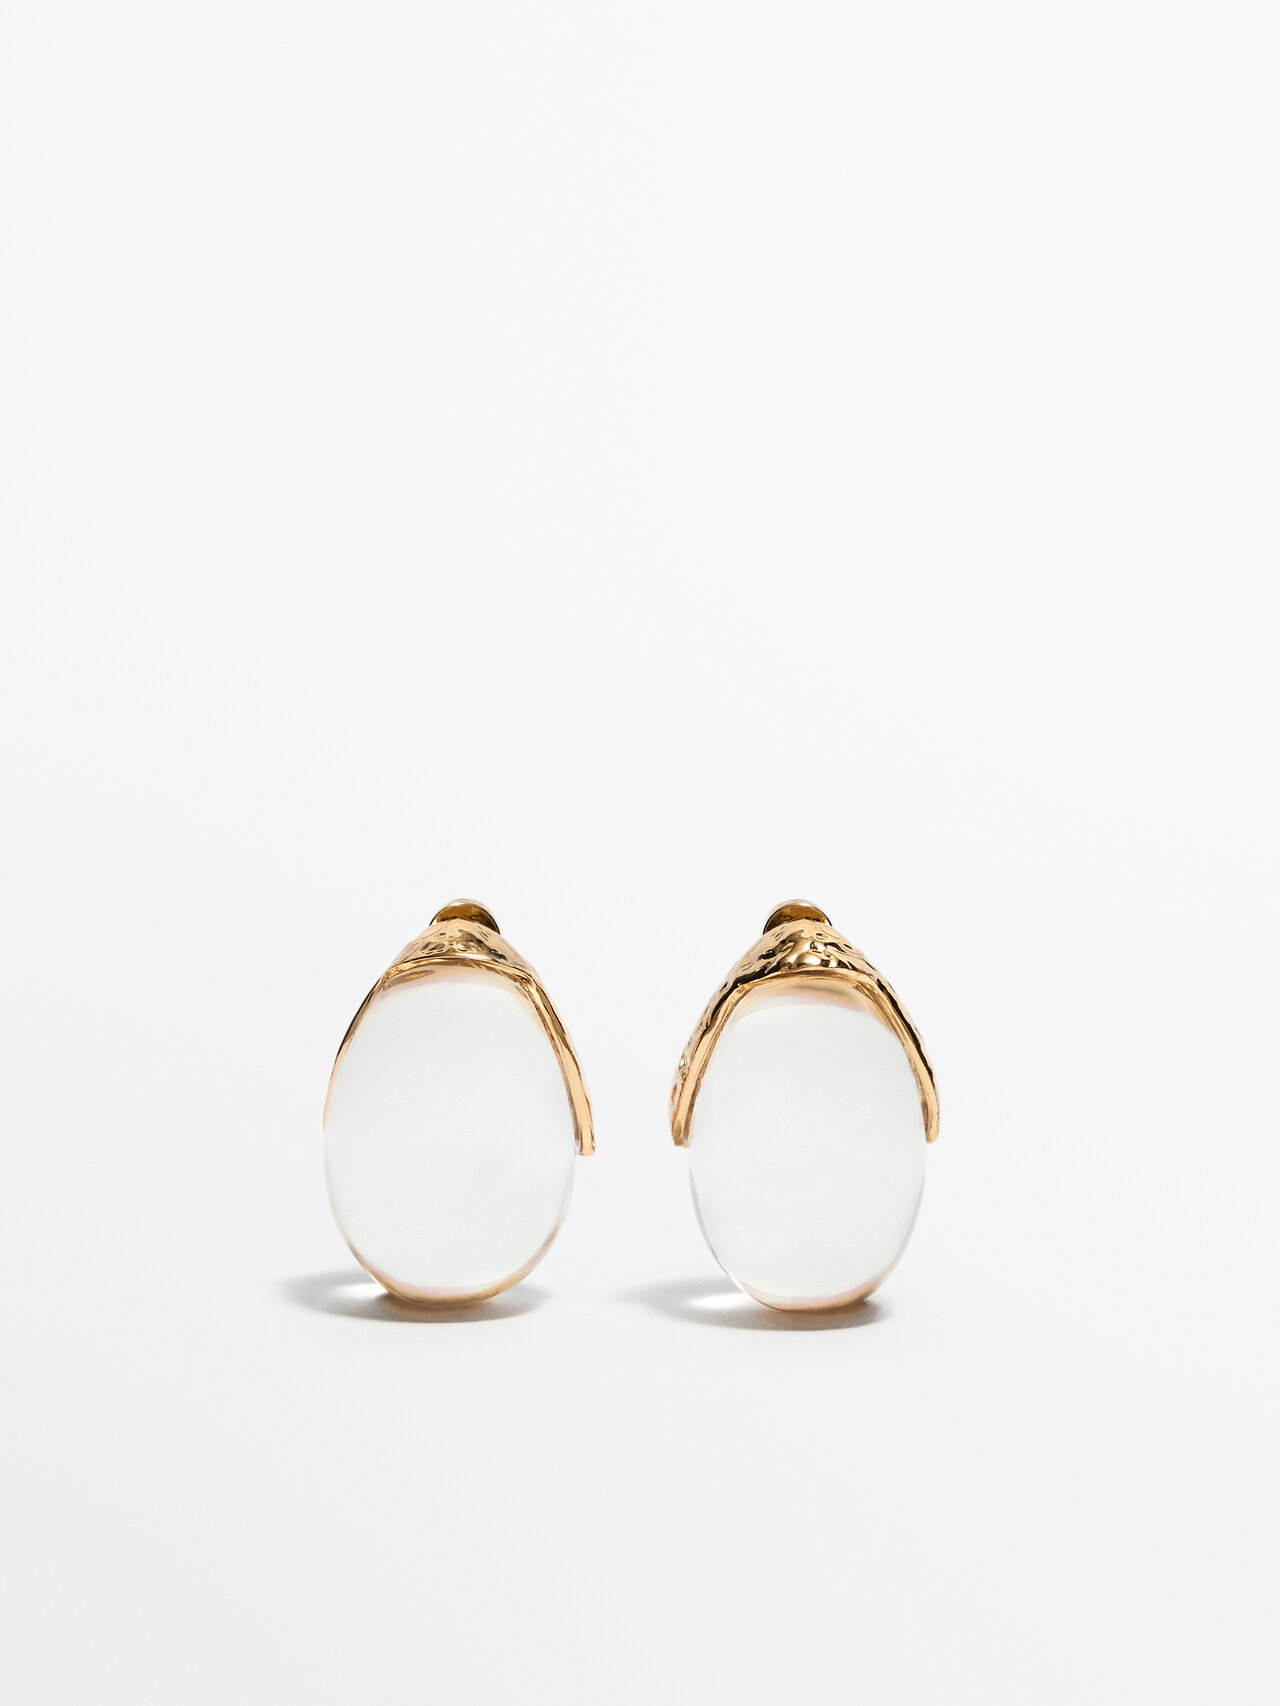 Massimo Dutti Medium Hoop Earrings With Resin Detail In Gold